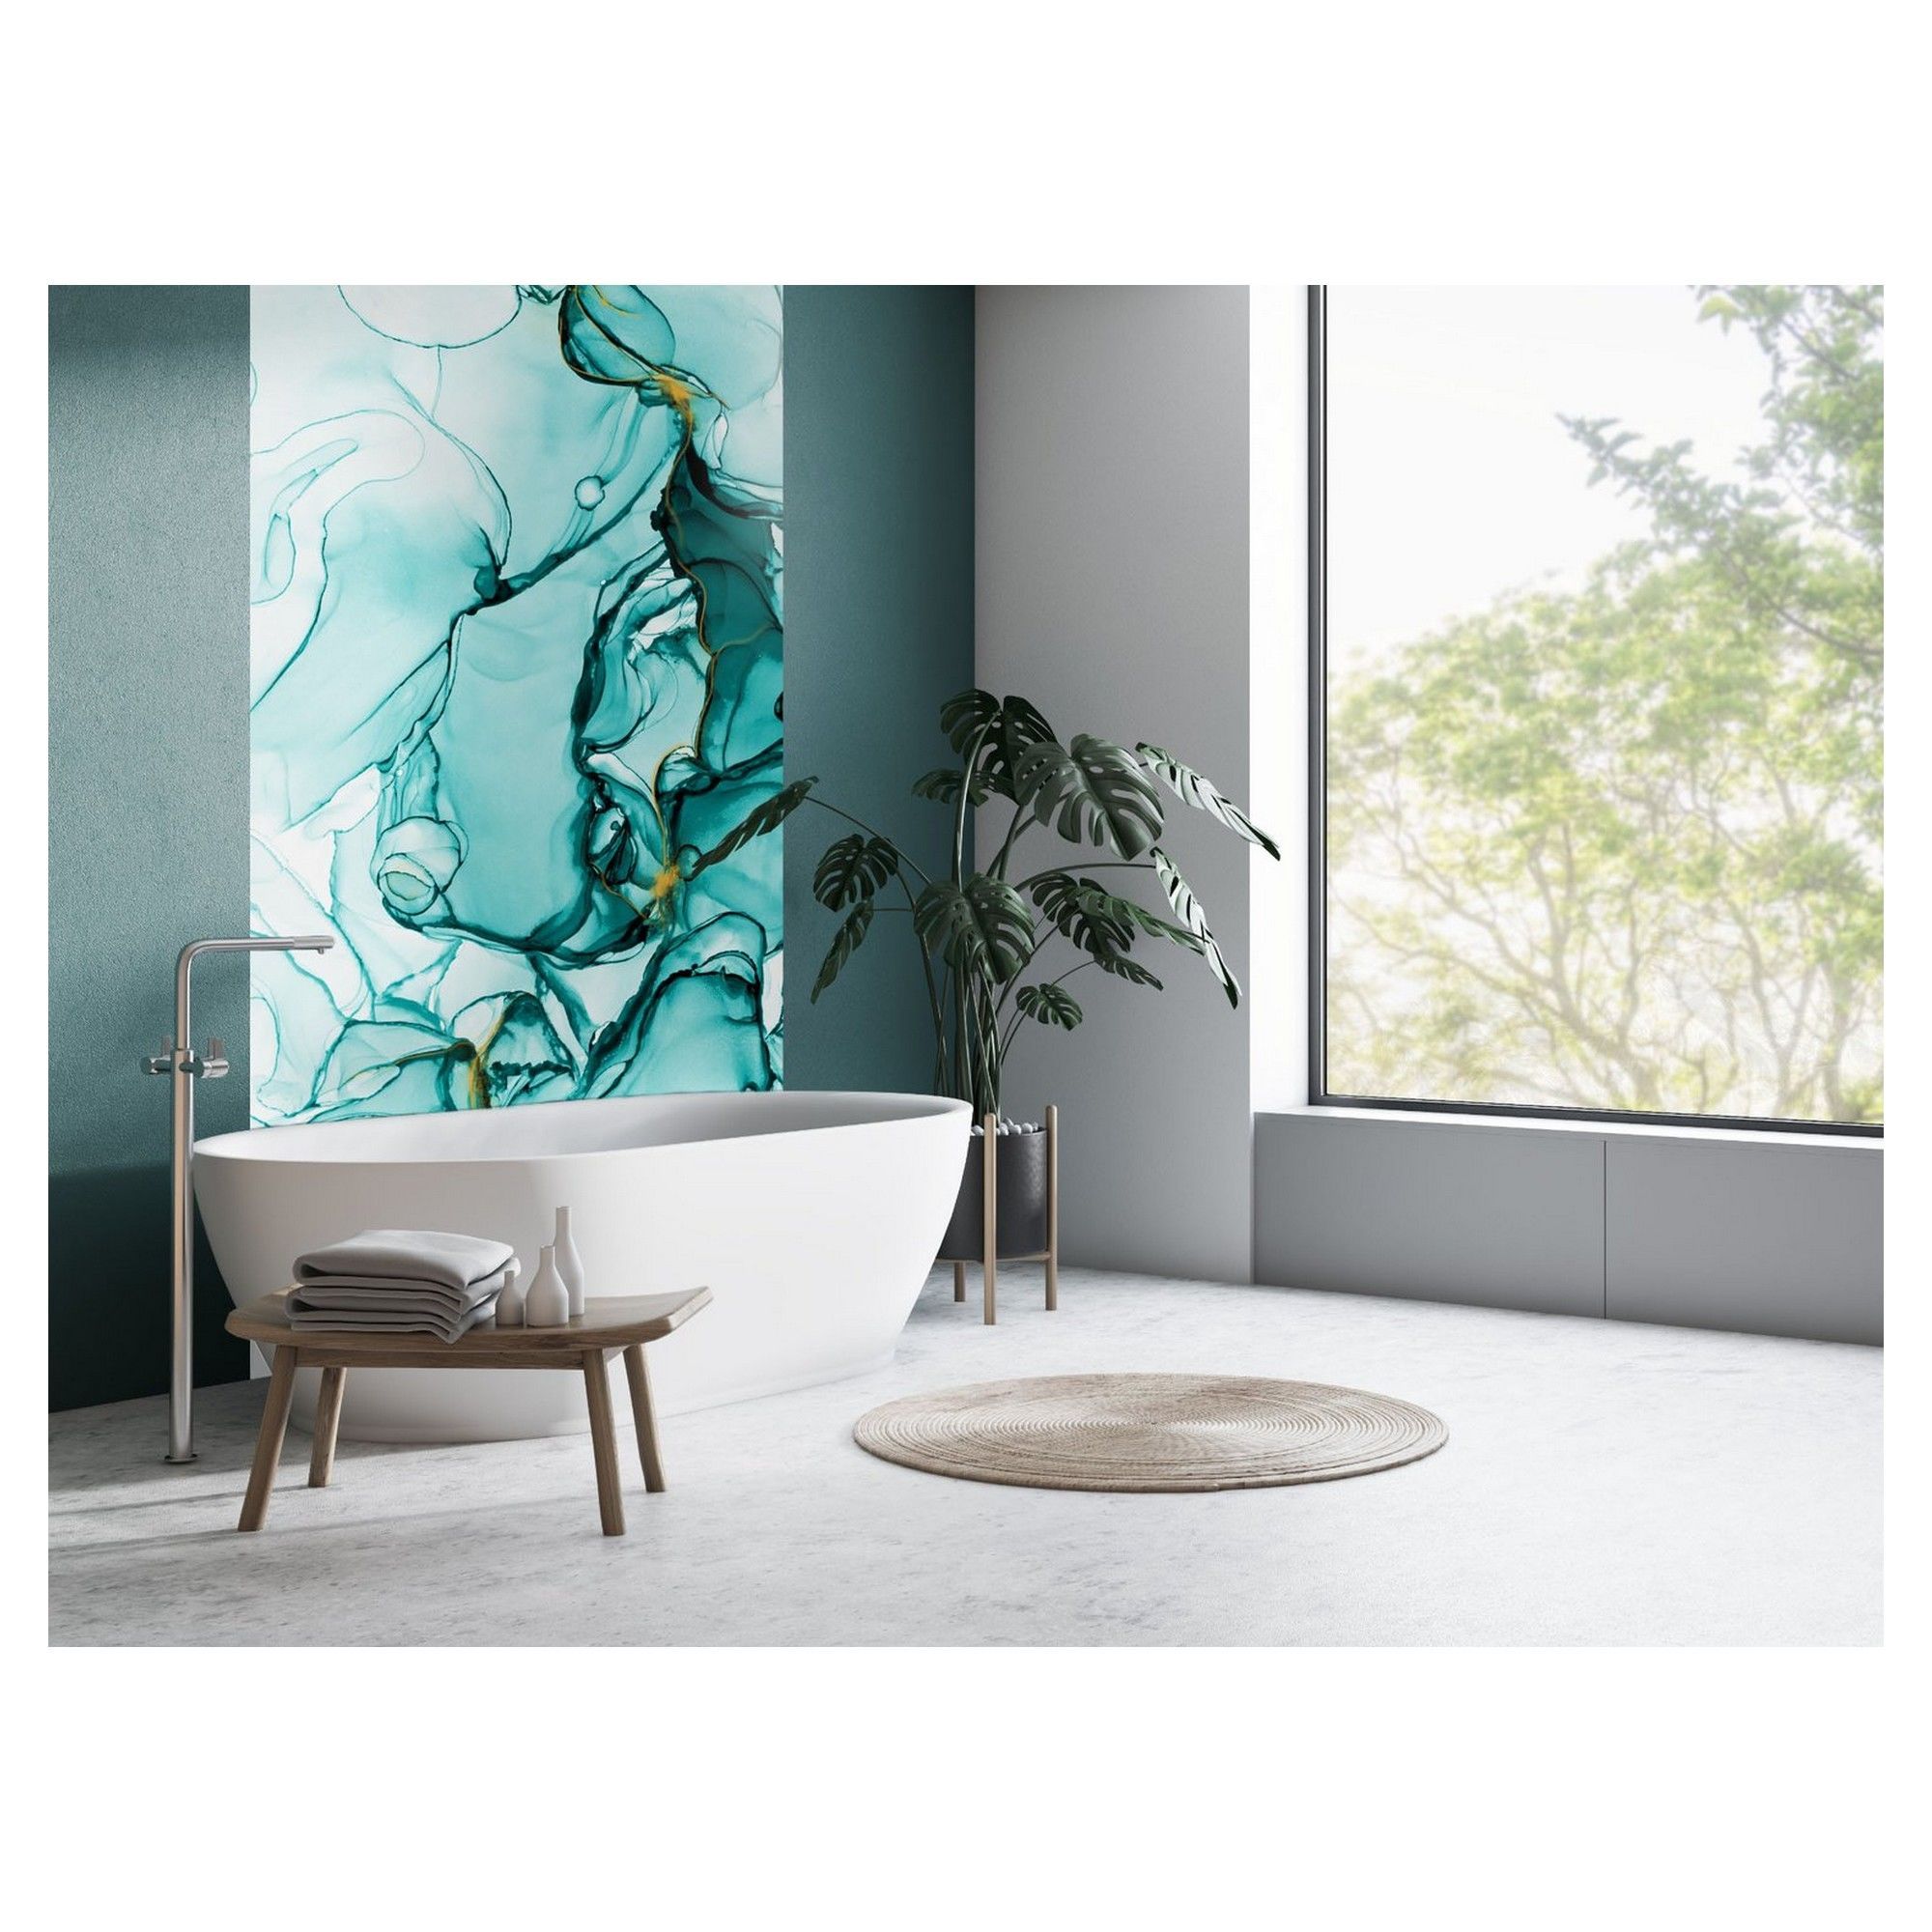 Surface Design Wall Panel – Glossy - Turquoise Blossom – 47.25 x